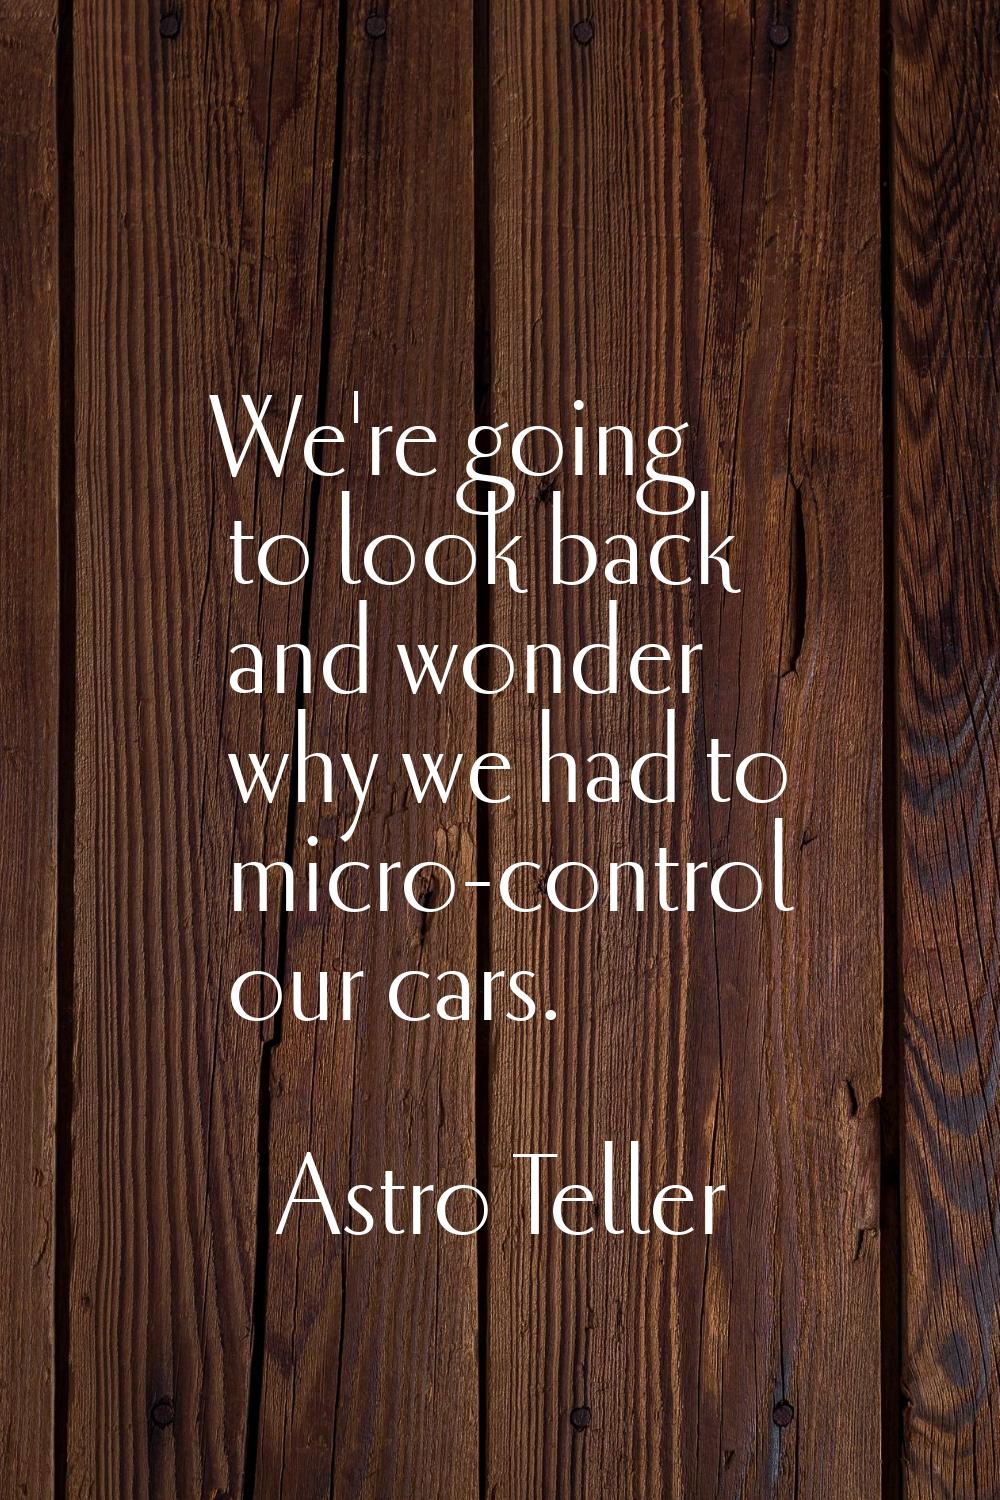 We're going to look back and wonder why we had to micro-control our cars.